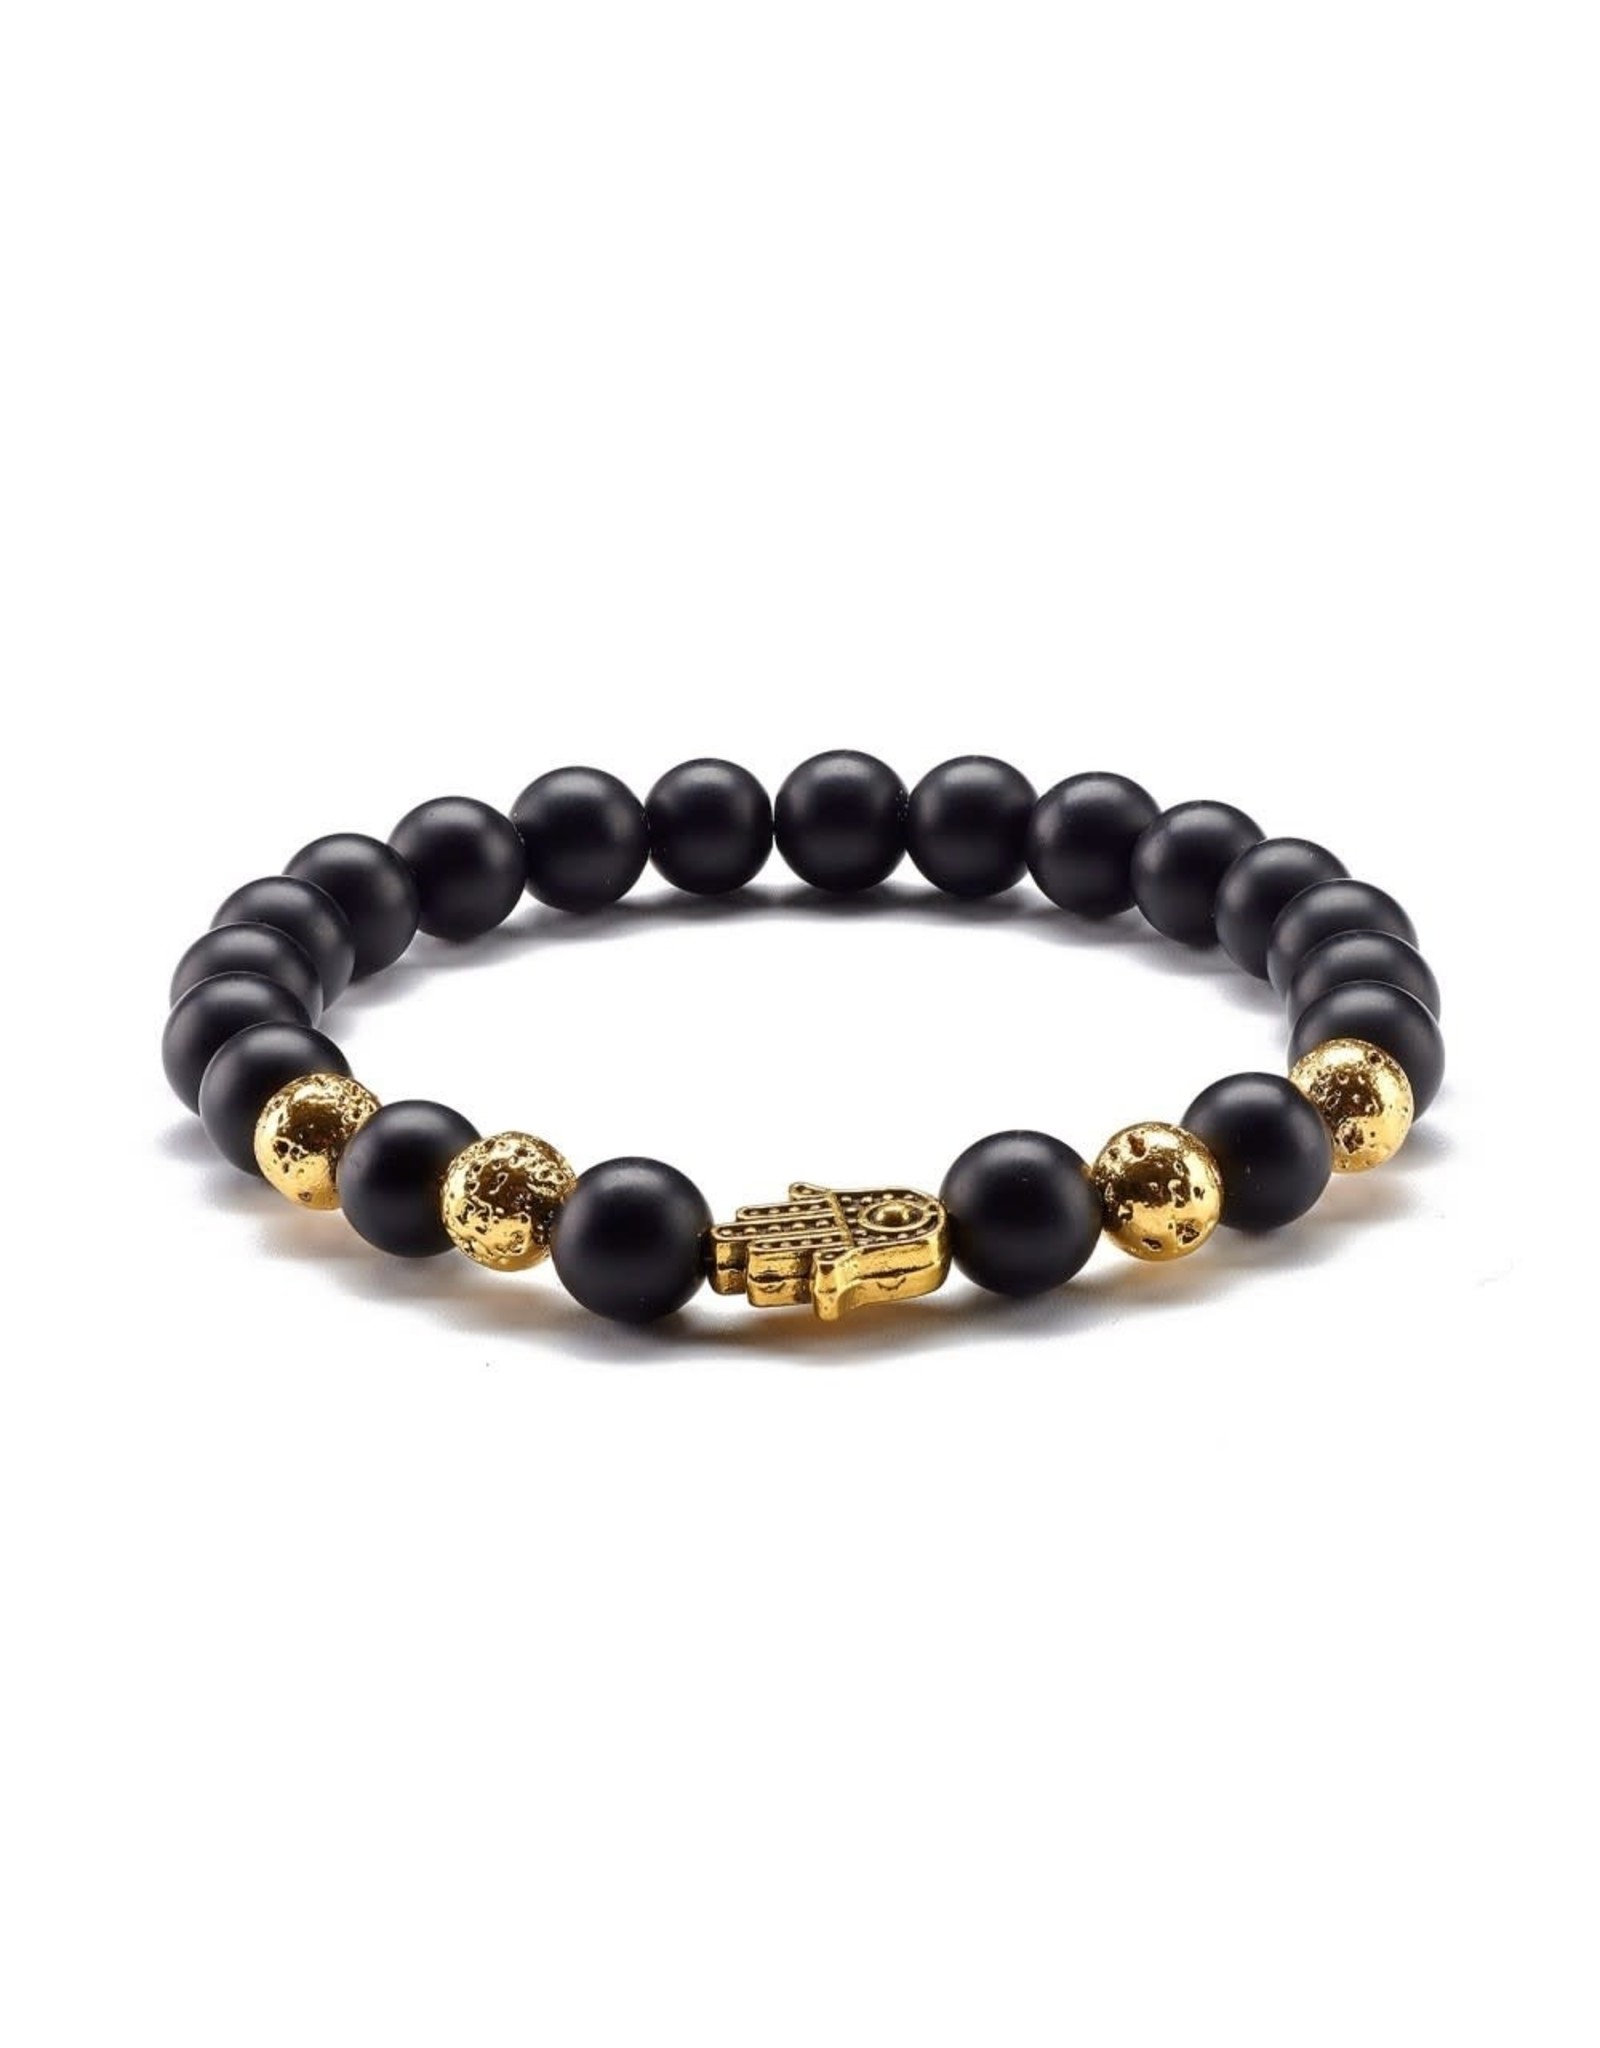 Bracelet with 8mm Lava and Gold Hamsa Hand